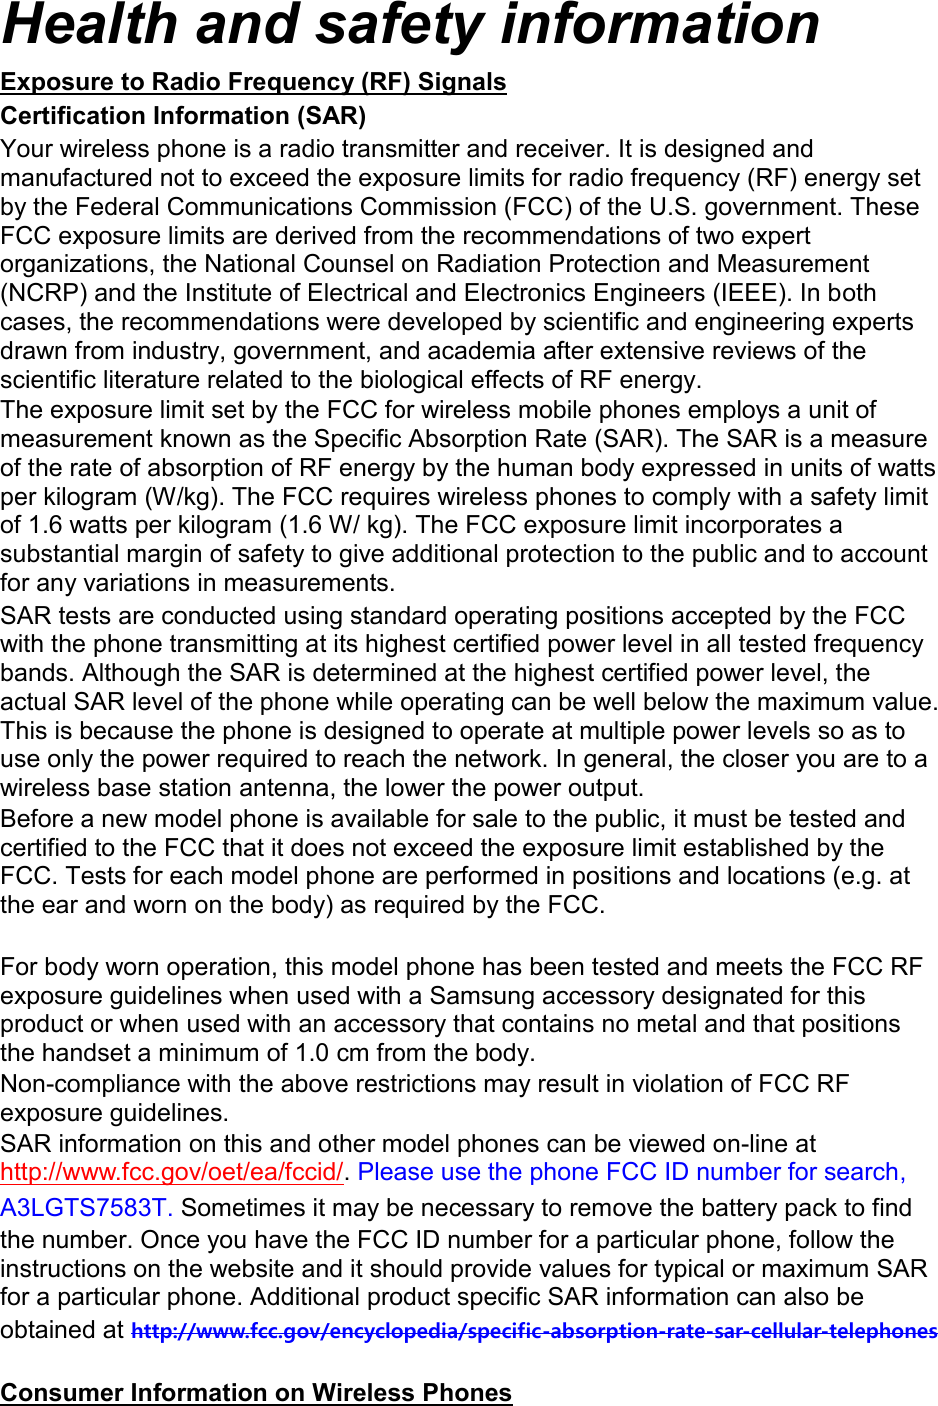 Health and safety information Exposure to Radio Frequency (RF) Signals Certification Information (SAR) Your wireless phone is a radio transmitter and receiver. It is designed and manufactured not to exceed the exposure limits for radio frequency (RF) energy set by the Federal Communications Commission (FCC) of the U.S. government. These FCC exposure limits are derived from the recommendations of two expert organizations, the National Counsel on Radiation Protection and Measurement (NCRP) and the Institute of Electrical and Electronics Engineers (IEEE). In both cases, the recommendations were developed by scientific and engineering experts drawn from industry, government, and academia after extensive reviews of the scientific literature related to the biological effects of RF energy. The exposure limit set by the FCC for wireless mobile phones employs a unit of measurement known as the Specific Absorption Rate (SAR). The SAR is a measure of the rate of absorption of RF energy by the human body expressed in units of watts per kilogram (W/kg). The FCC requires wireless phones to comply with a safety limit of 1.6 watts per kilogram (1.6 W/ kg). The FCC exposure limit incorporates a substantial margin of safety to give additional protection to the public and to account for any variations in measurements. SAR tests are conducted using standard operating positions accepted by the FCC with the phone transmitting at its highest certified power level in all tested frequency bands. Although the SAR is determined at the highest certified power level, the actual SAR level of the phone while operating can be well below the maximum value. This is because the phone is designed to operate at multiple power levels so as to use only the power required to reach the network. In general, the closer you are to a wireless base station antenna, the lower the power output. Before a new model phone is available for sale to the public, it must be tested and certified to the FCC that it does not exceed the exposure limit established by the FCC. Tests for each model phone are performed in positions and locations (e.g. at the ear and worn on the body) as required by the FCC.      For body worn operation, this model phone has been tested and meets the FCC RF exposure guidelines when used with a Samsung accessory designated for this product or when used with an accessory that contains no metal and that positions the handset a minimum of 1.0 cm from the body.   Non-compliance with the above restrictions may result in violation of FCC RF exposure guidelines. SAR information on this and other model phones can be viewed on-line at http://www.fcc.gov/oet/ea/fccid/. Please use the phone FCC ID number for search, A3LGTS7583T. Sometimes it may be necessary to remove the battery pack to find the number. Once you have the FCC ID number for a particular phone, follow the instructions on the website and it should provide values for typical or maximum SAR for a particular phone. Additional product specific SAR information can also be obtained at http://www.fcc.gov/encyclopedia/specific-absorption-rate-sar-cellular-telephones  Consumer Information on Wireless Phones 